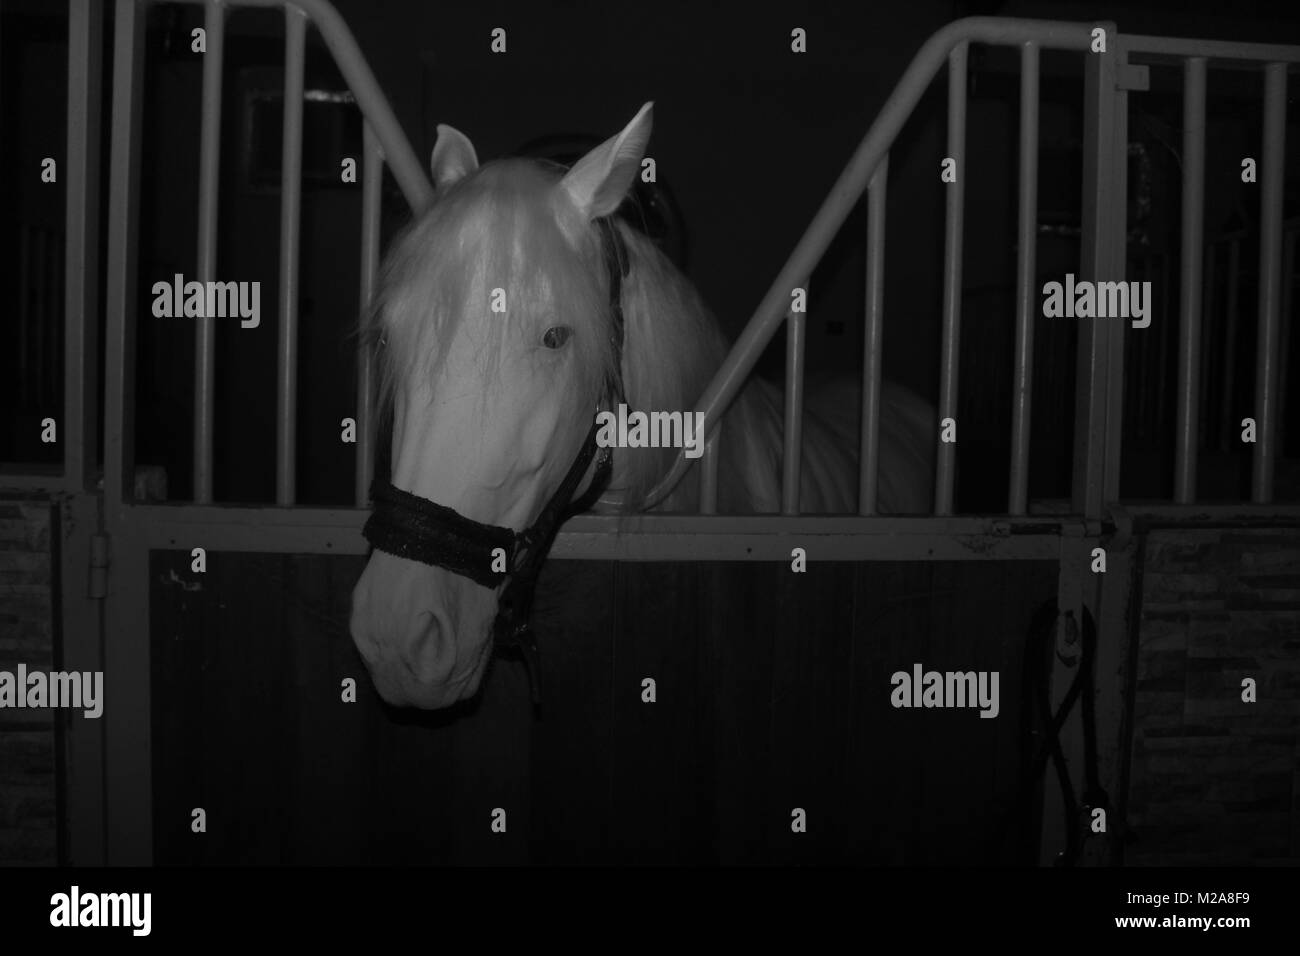 A black and white photograph of a white, albino horse in its stable, at night. Stock Photo